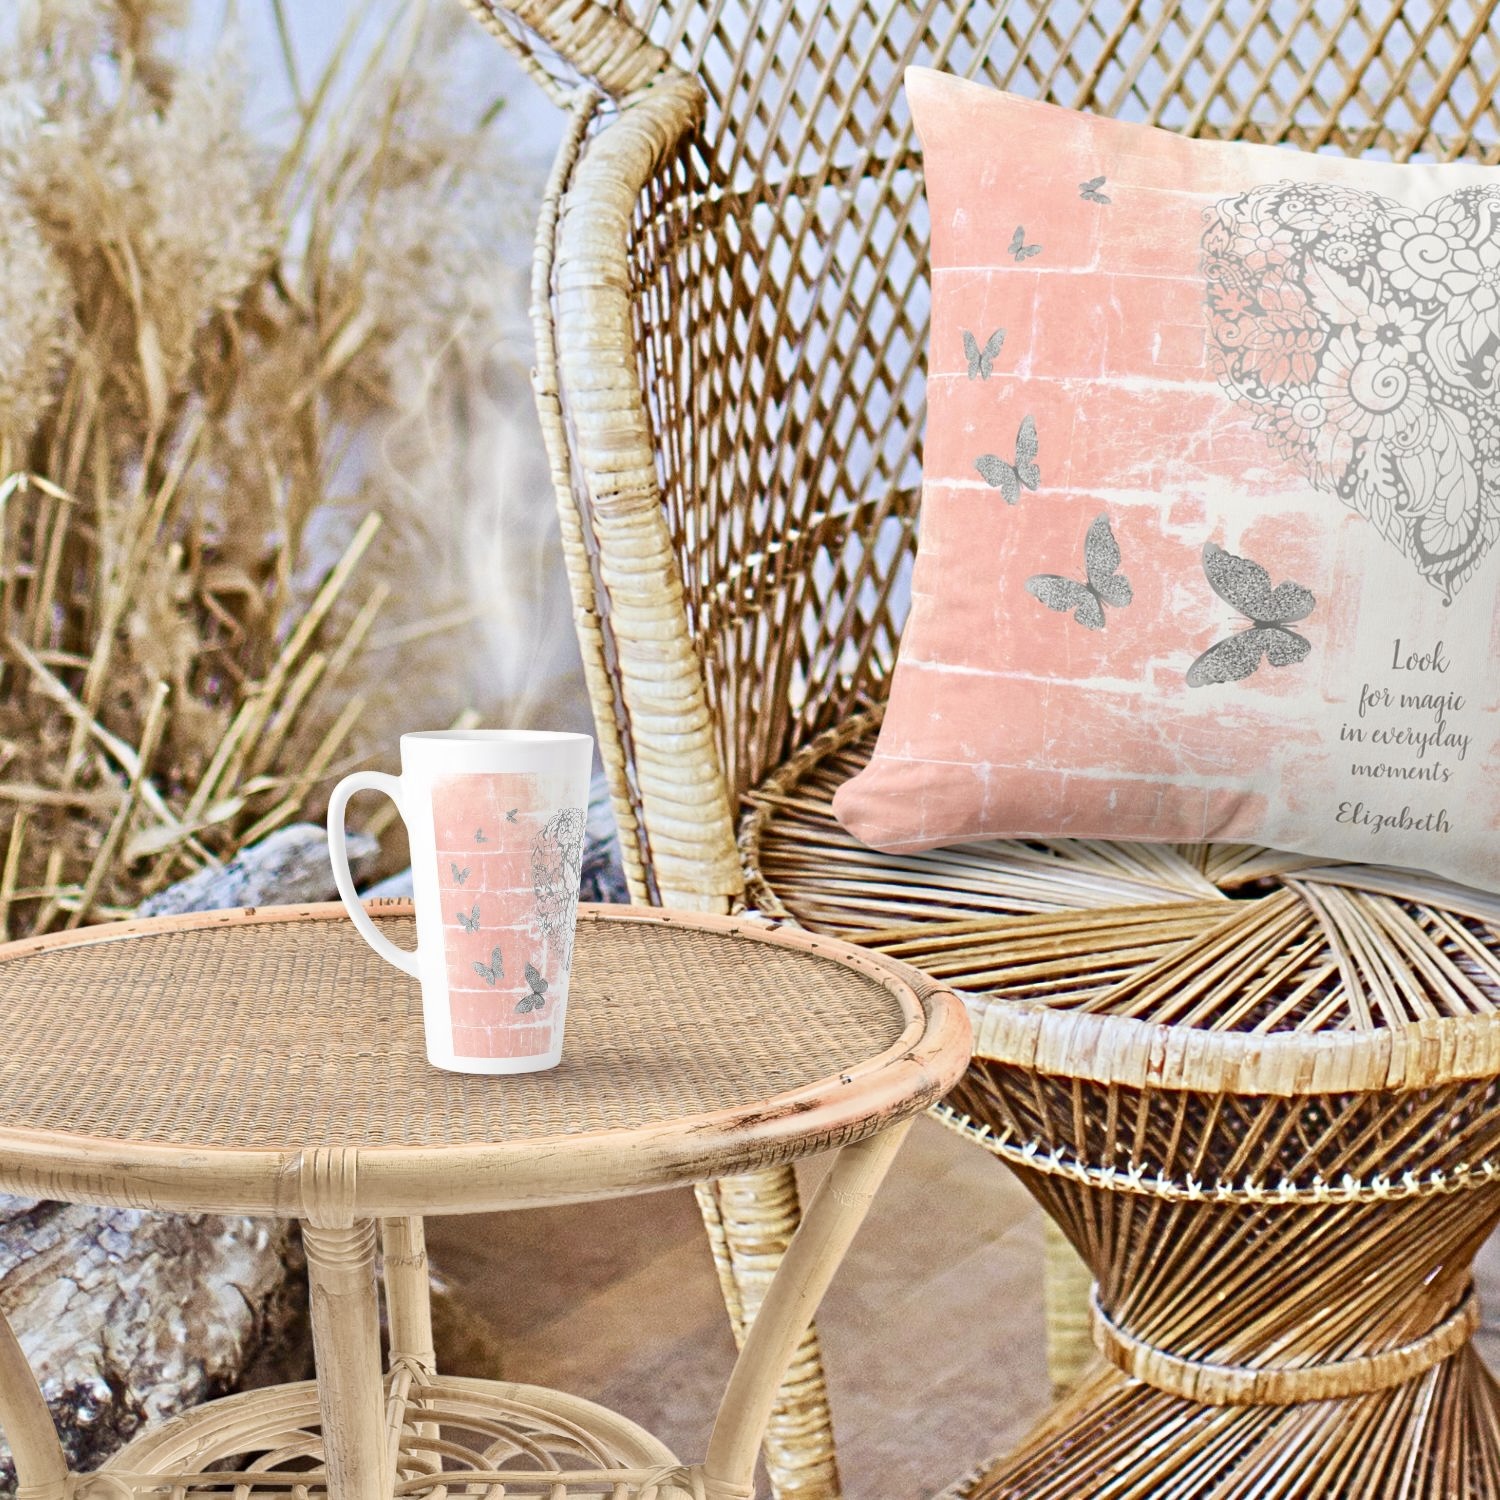 A latte mug and pillow displayed on wicker furniture, featuring serene peach tones and inspiring designs.